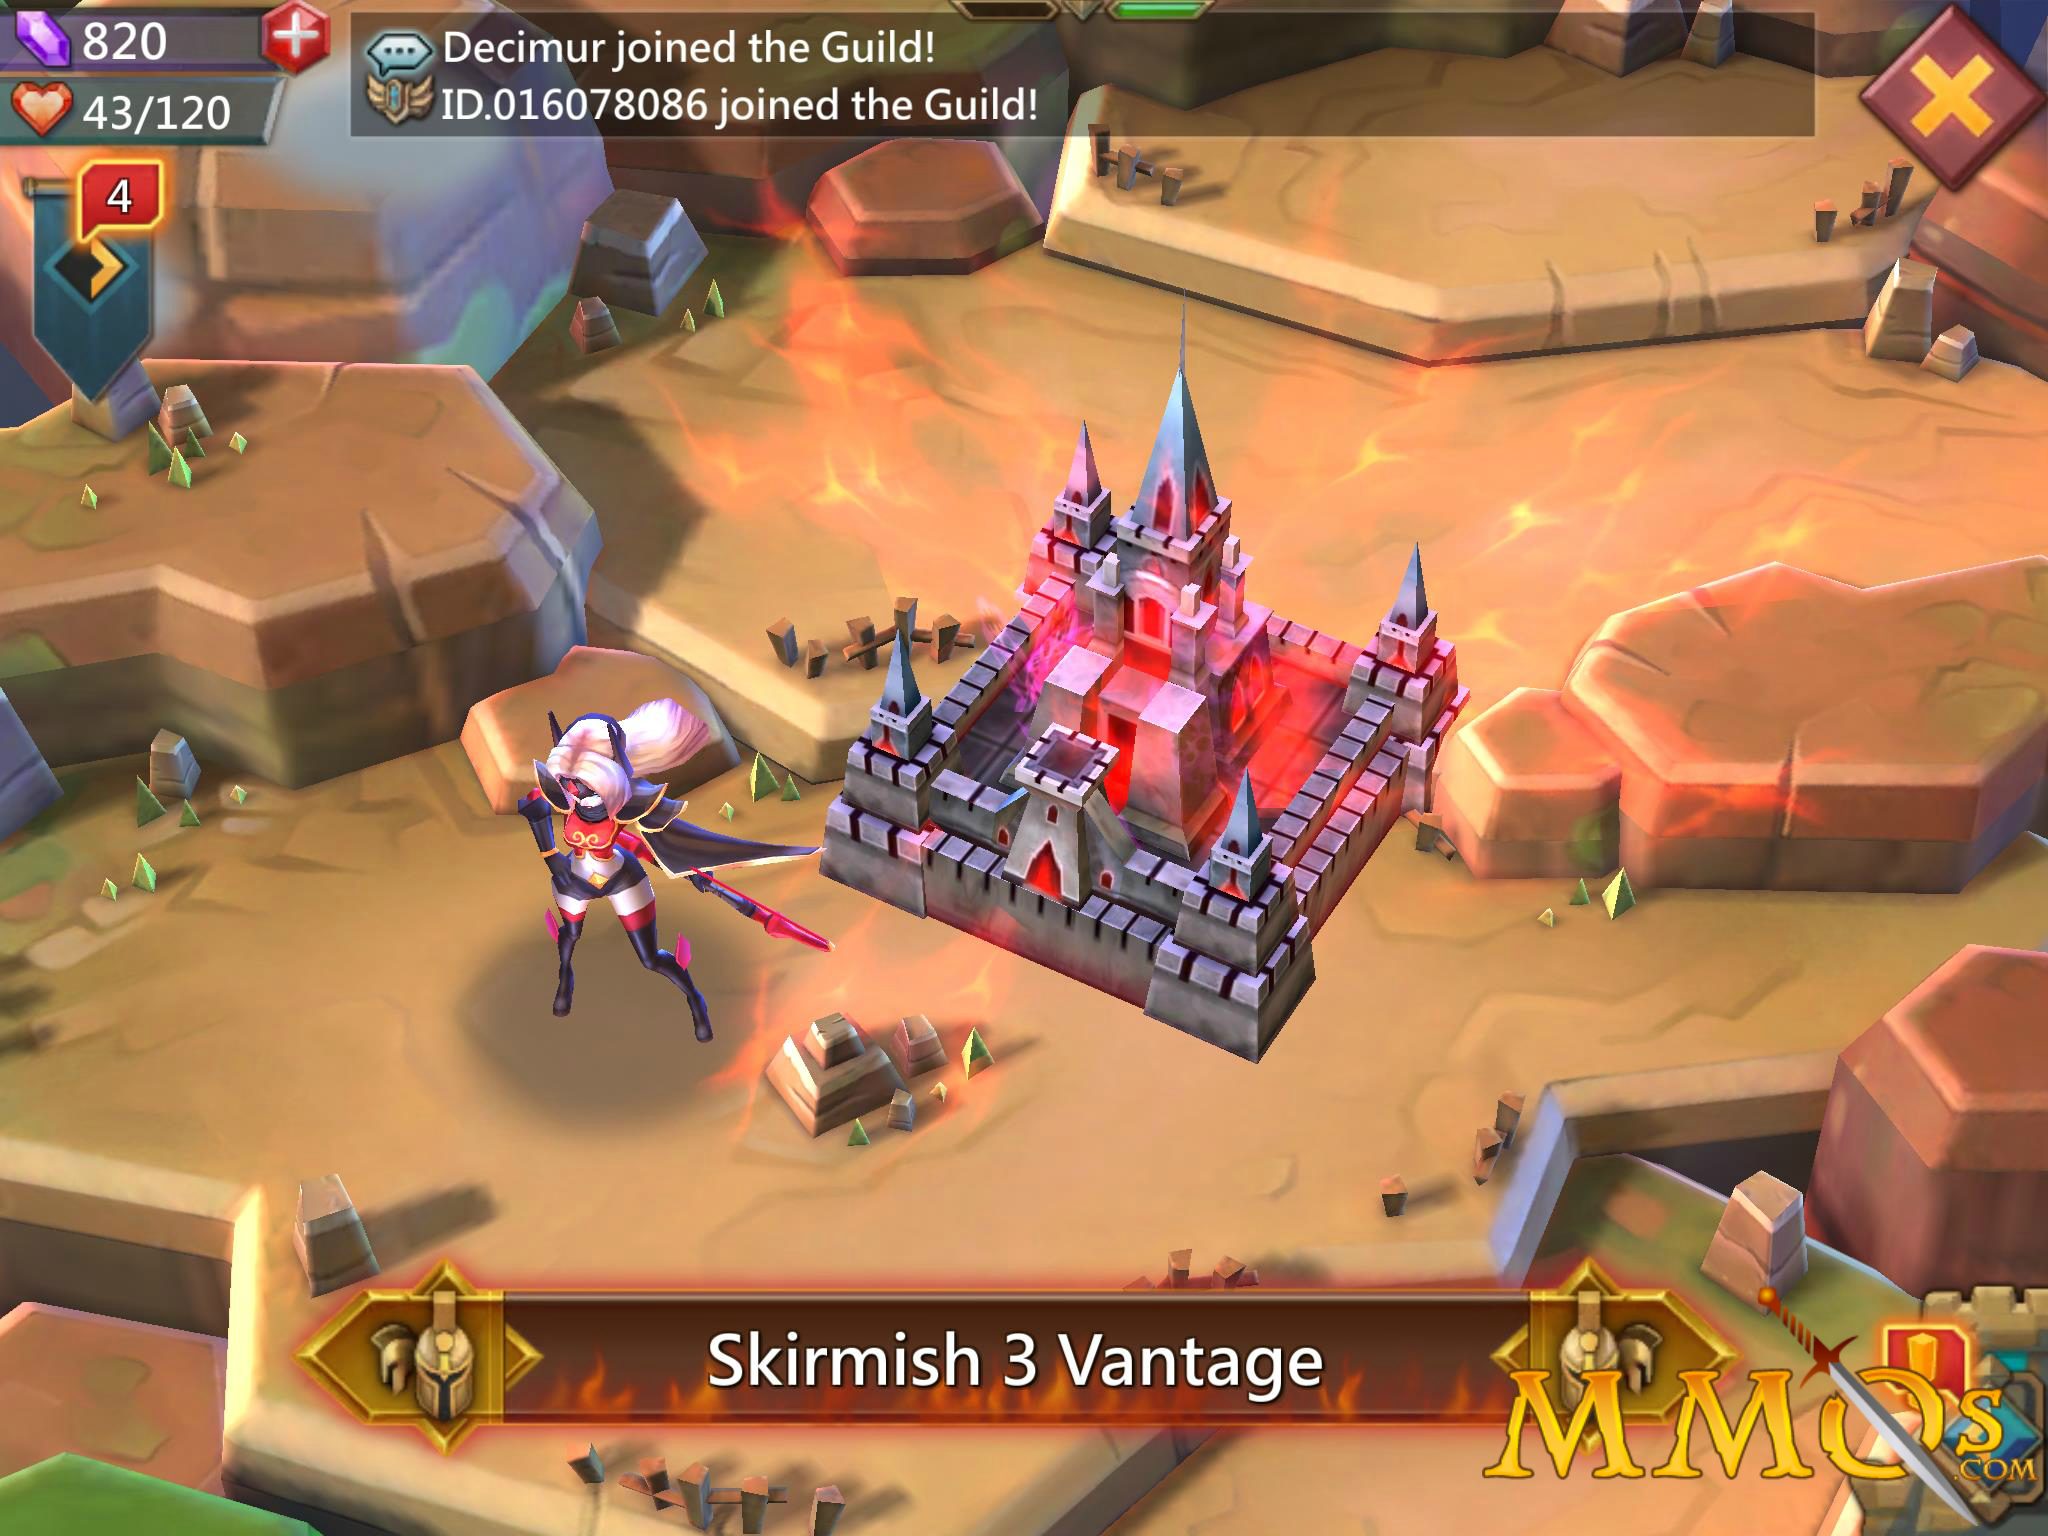 Stake your claim in hit strategy MMO Lords Mobile